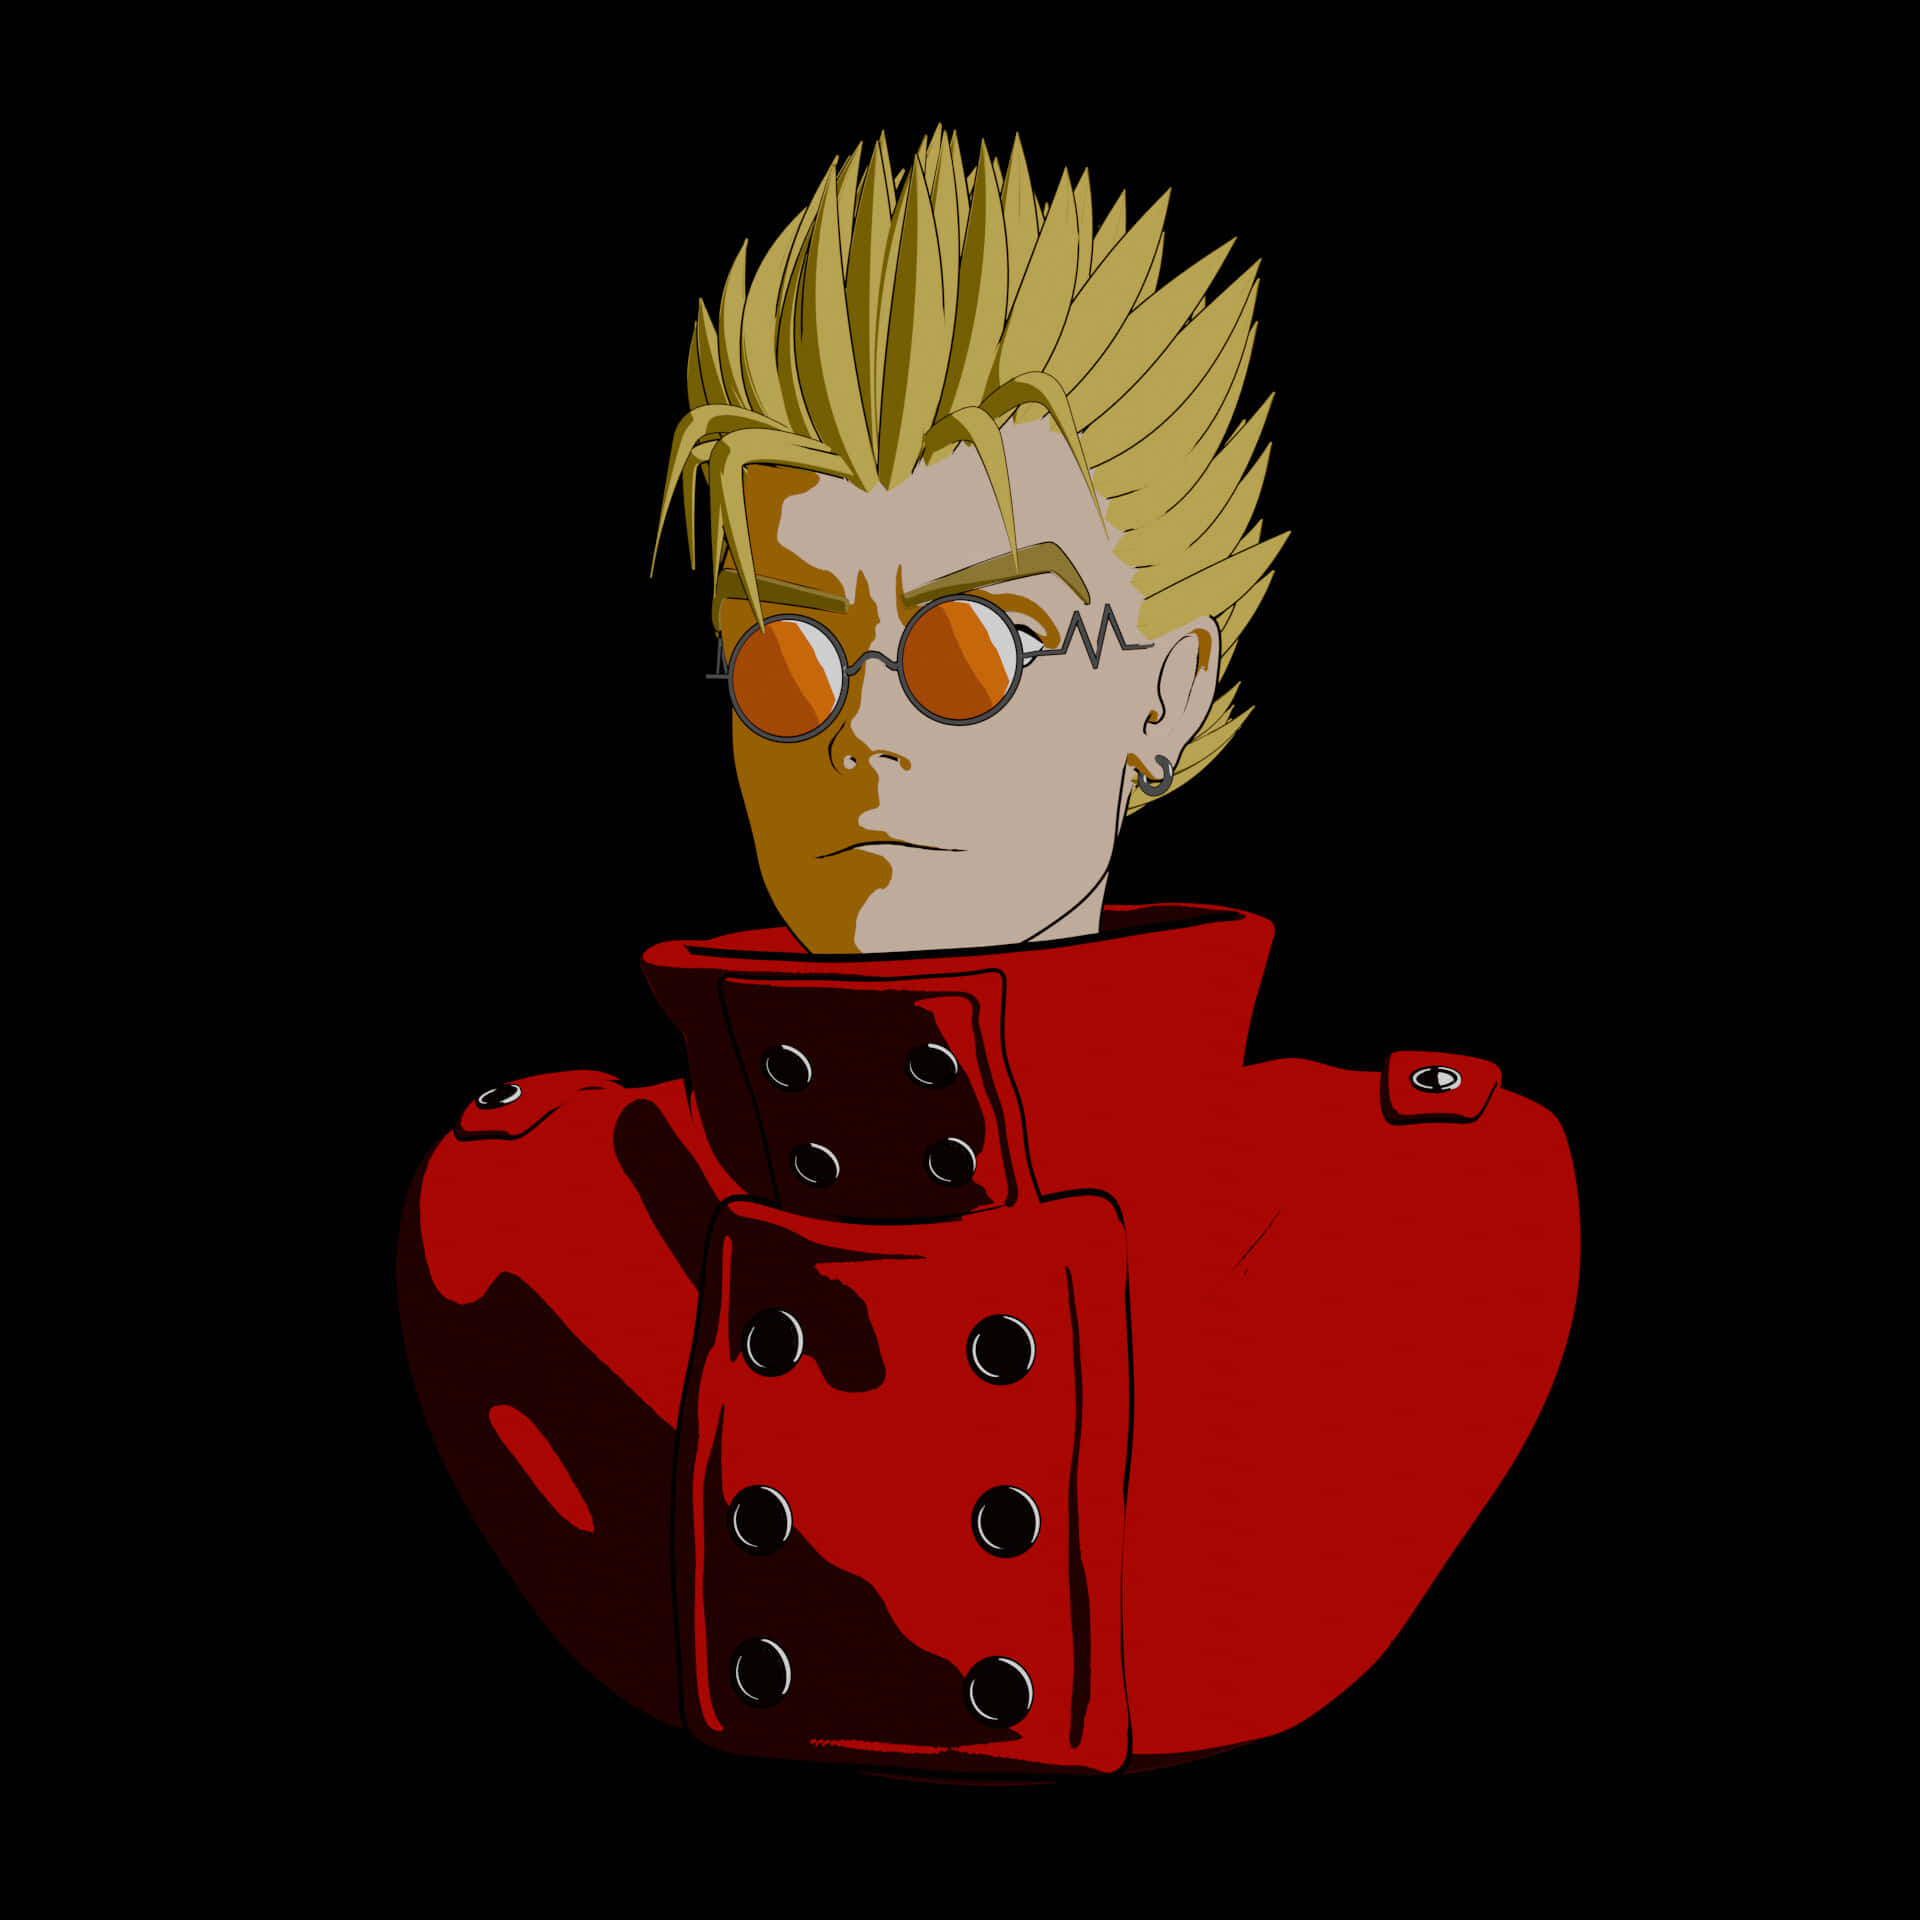 Vash the Stampede in a dynamic action pose Wallpaper